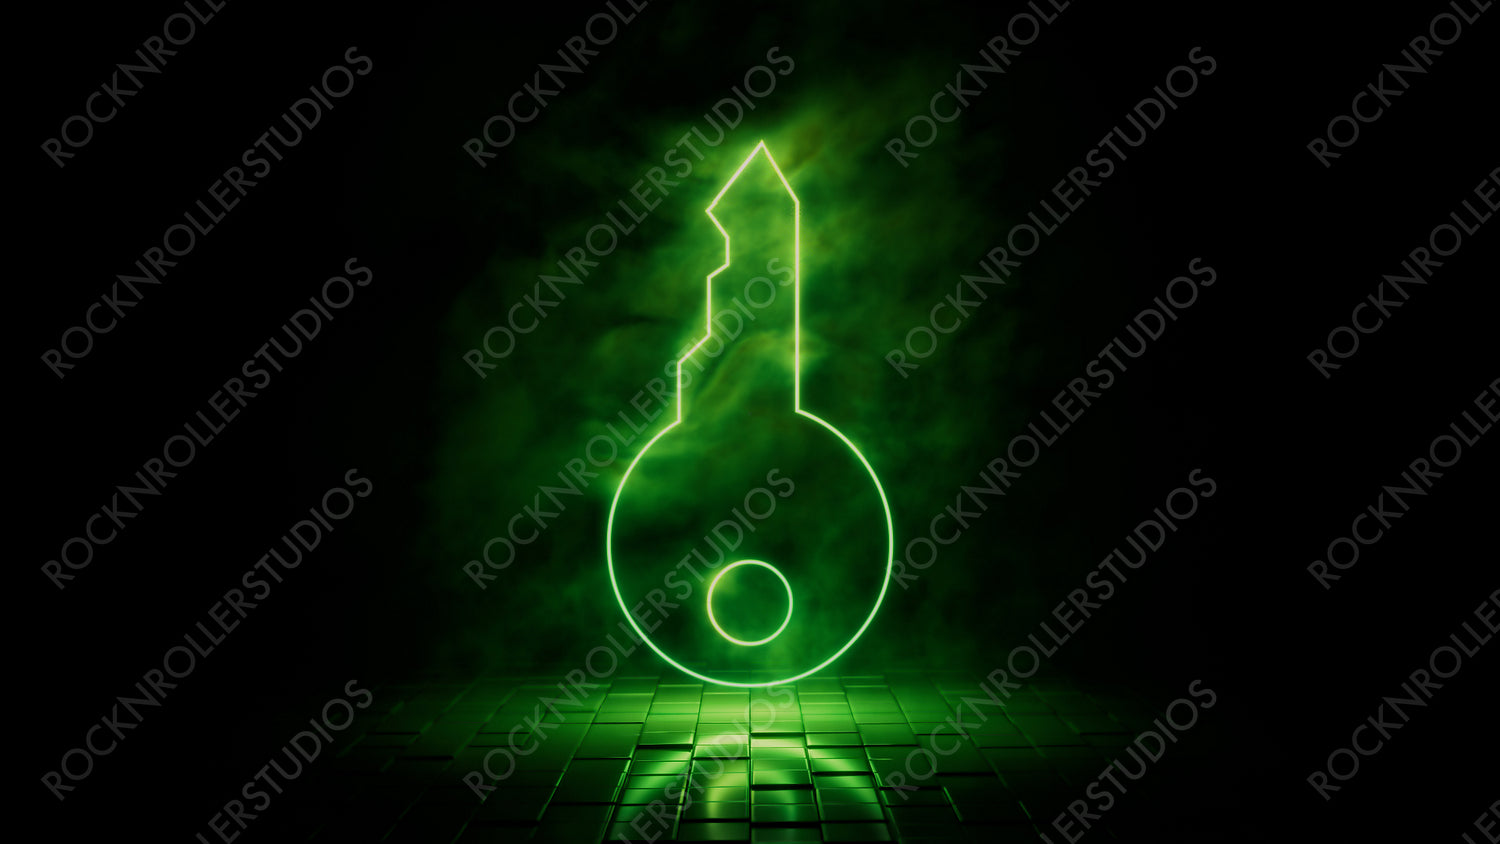 Green neon light key icon. Vibrant colored technology symbol, isolated on a black background. 3D Render